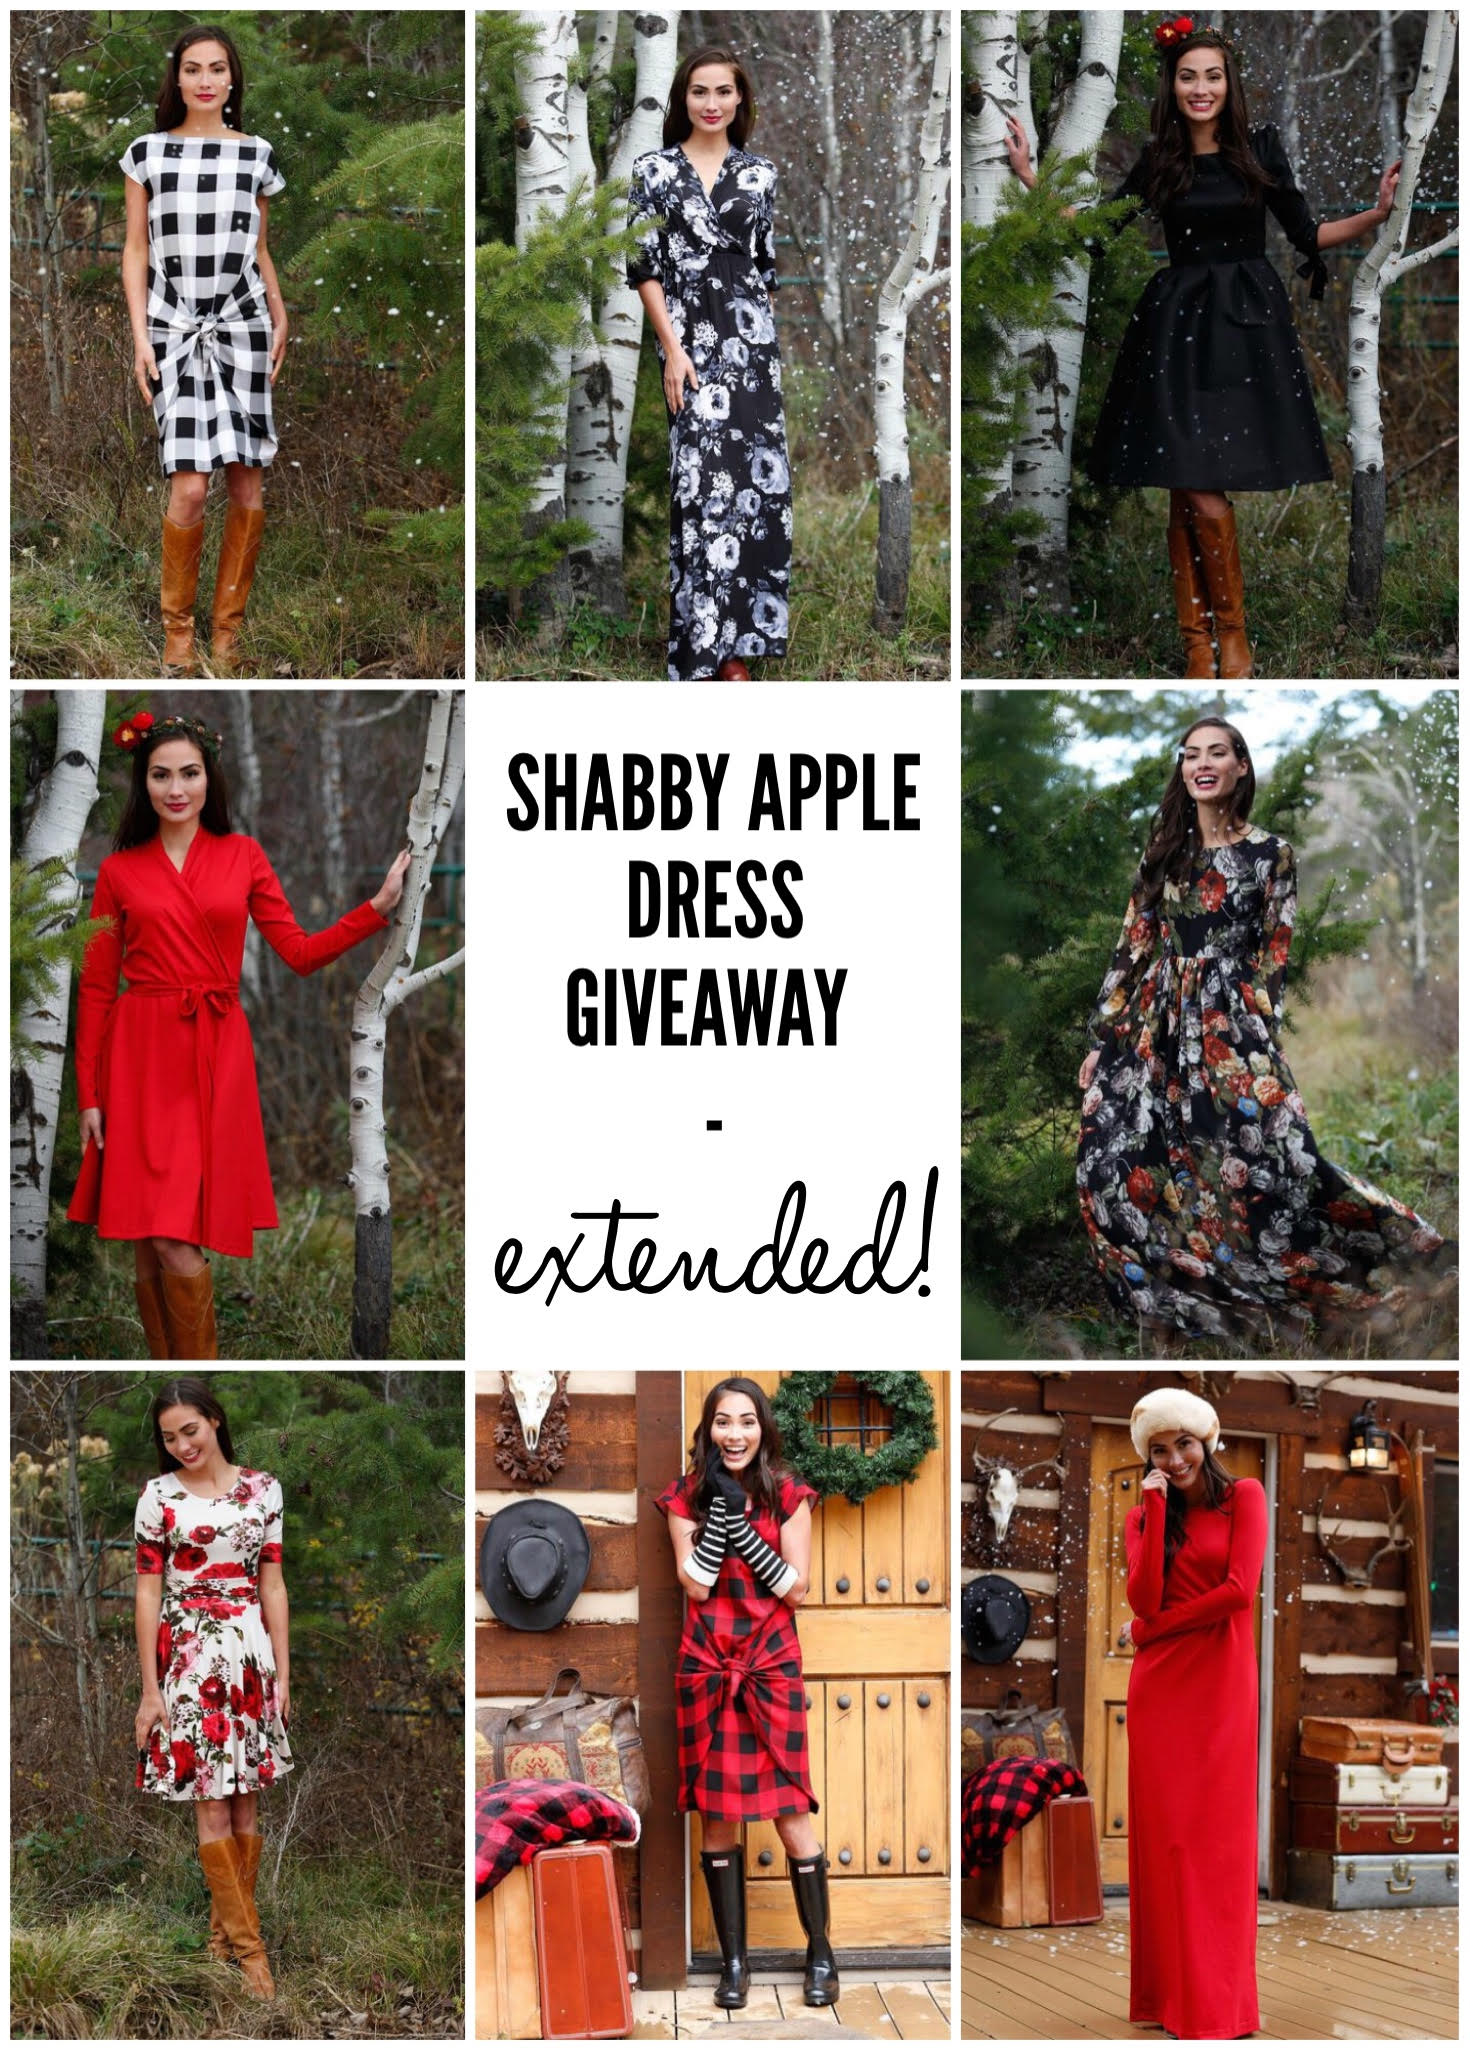 Shabby Apple Dress Giveaway on Downtown Demure (ends Dec 12)